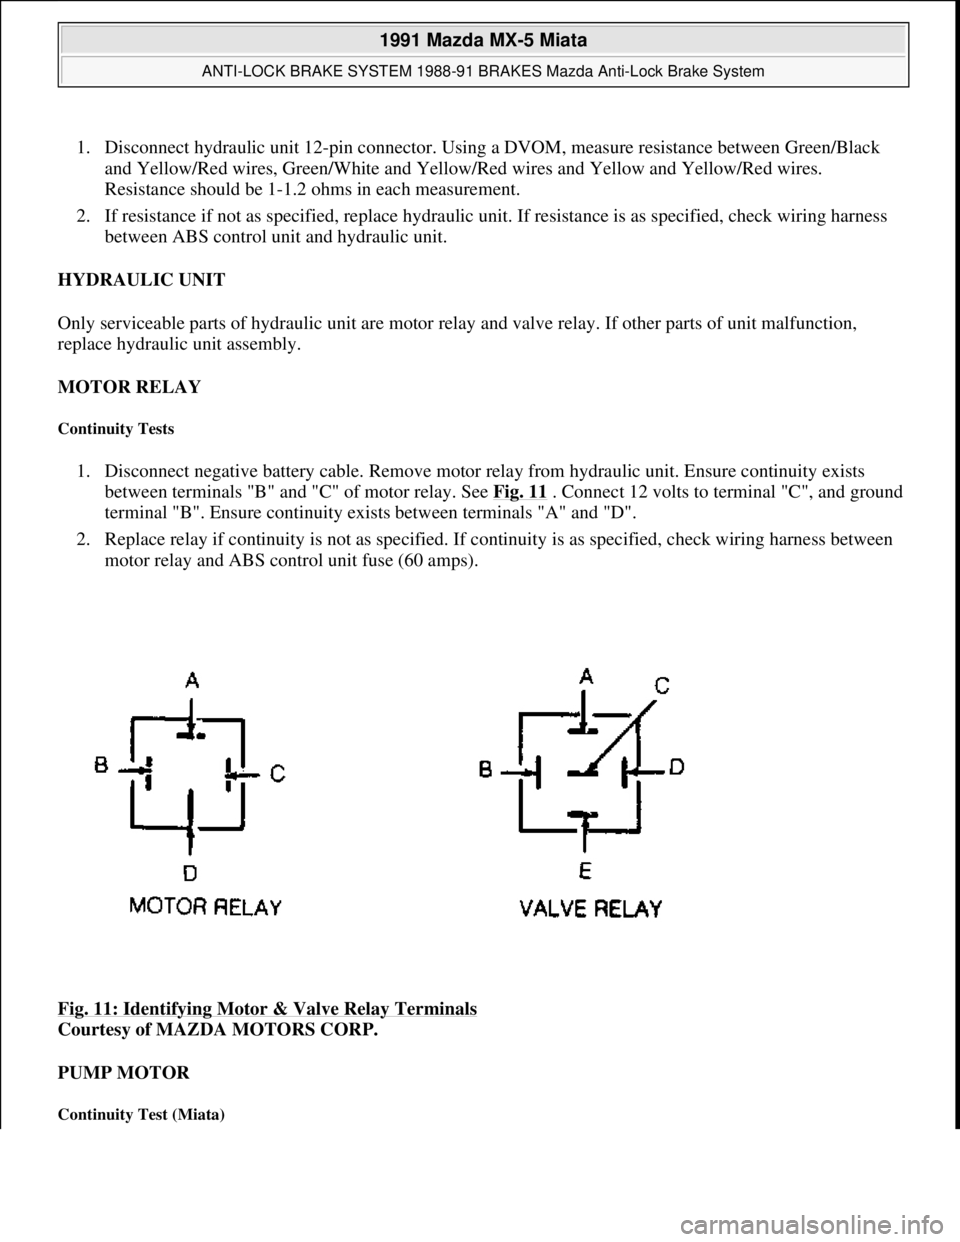 MAZDA MIATA 1991  Factory Service Manual 1. Disconnect hydraulic unit 12-pin connector. Using a DVOM, measure resistance between Green/Black 
and Yellow/Red wires, Green/White and Yellow/Red wires and Yellow and Yellow/Red wires. 
Resistance